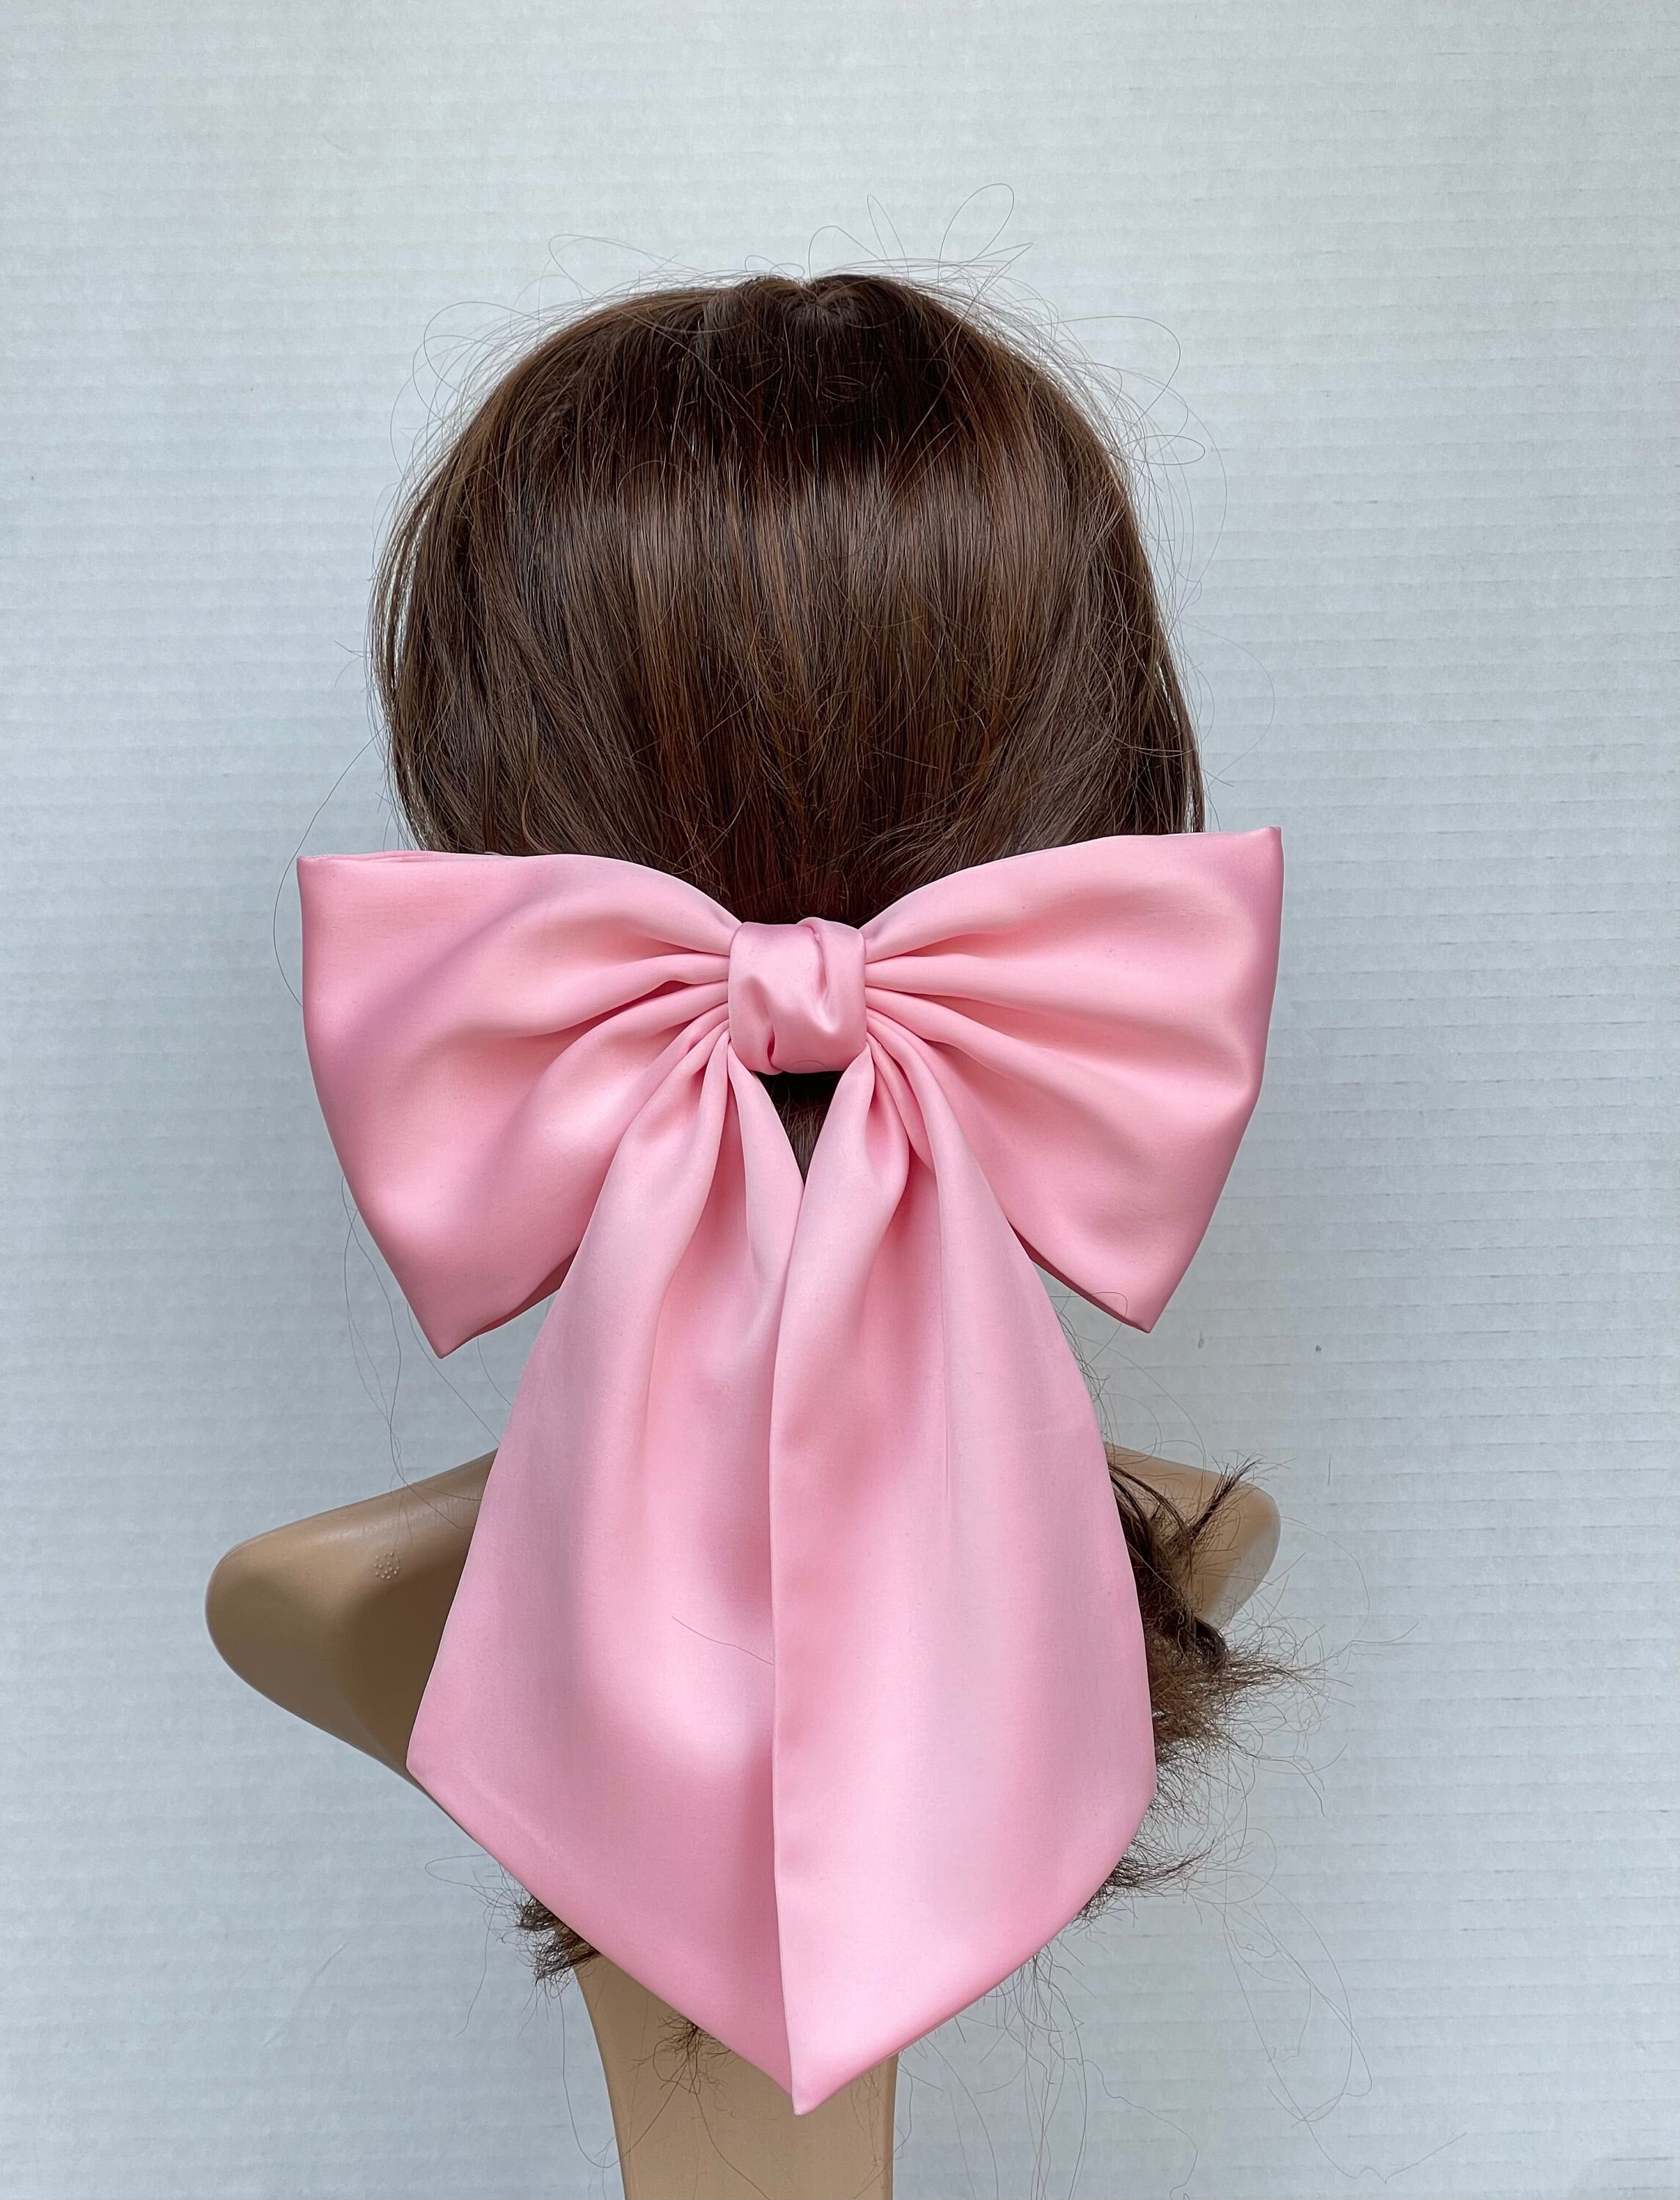 Pink Bow for Girls. Double Satin Pink Bow. Pink Bow Barrette for